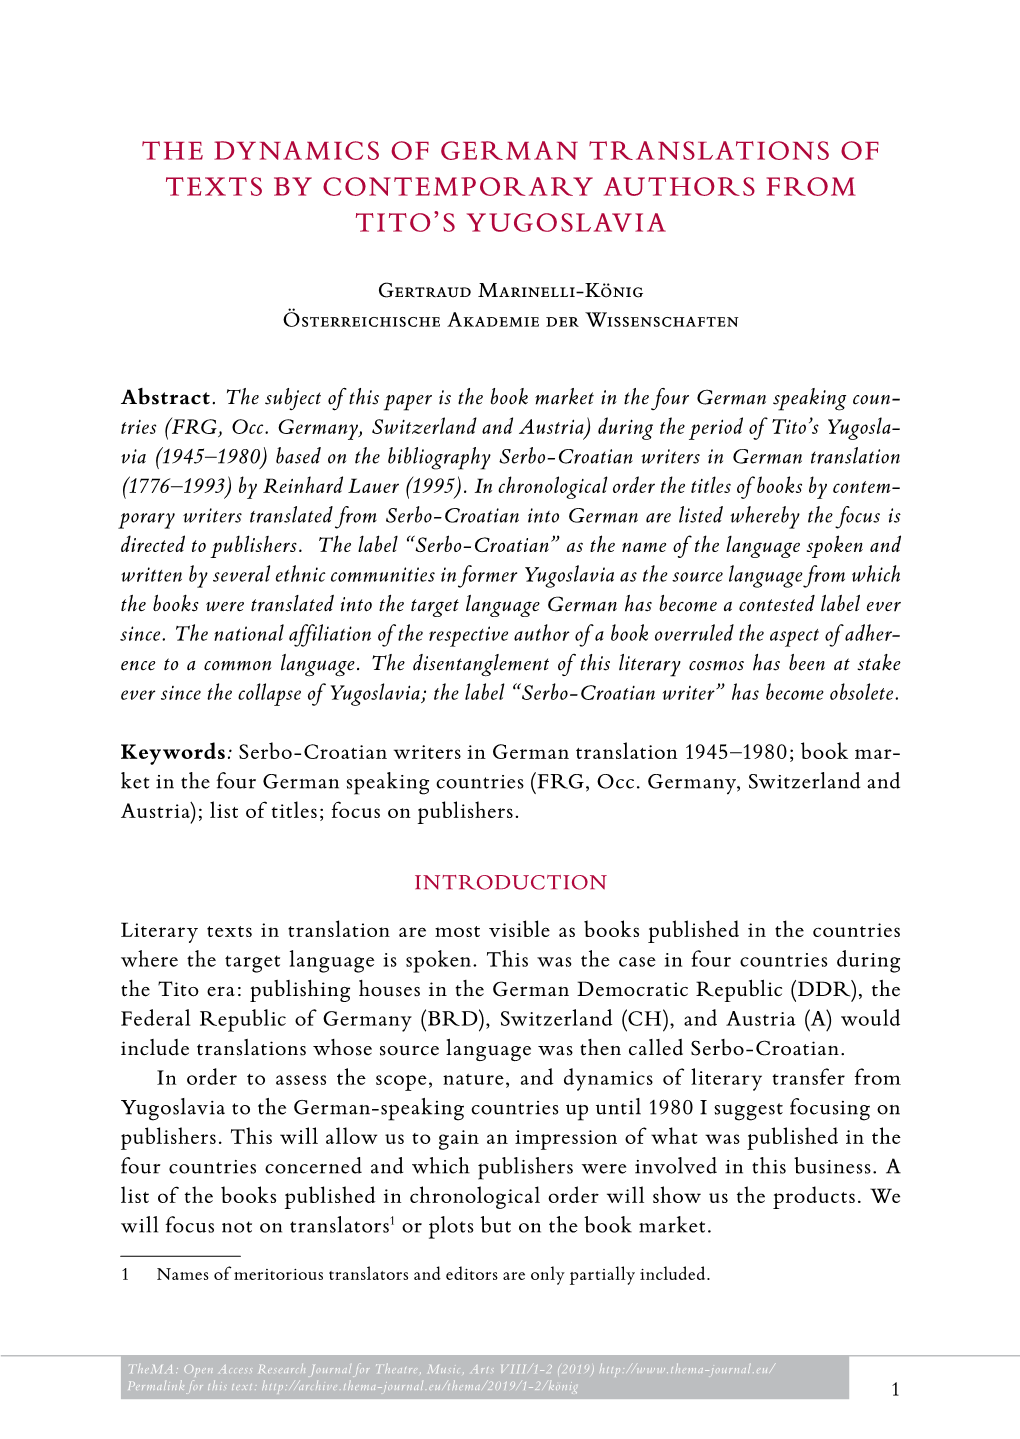 The Dynamics of German Translations of Texts by Contemporary Authors from Tito’S Yugoslavia